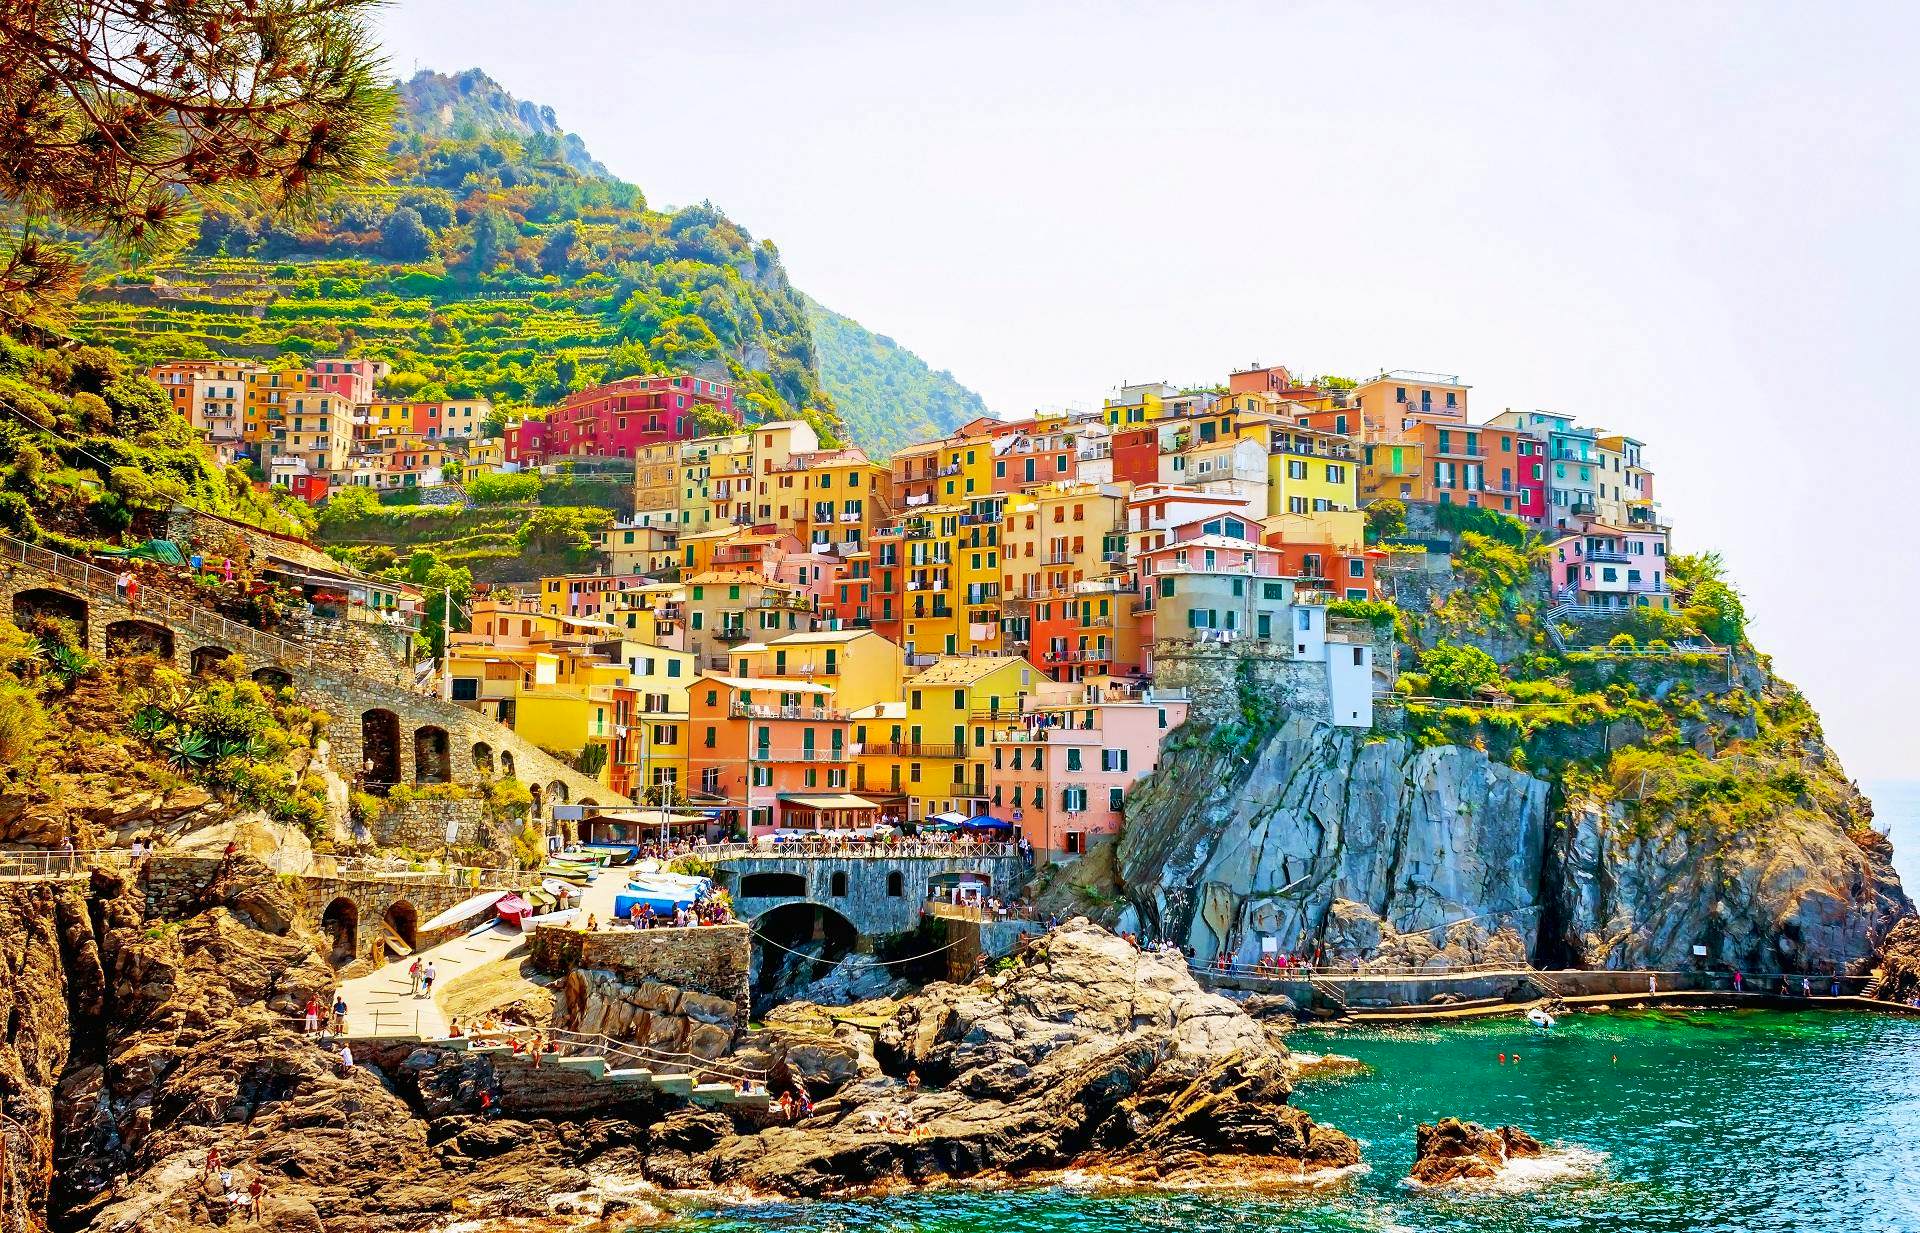 From Florence: Pisa and Cinque Terre Full-Day Tour